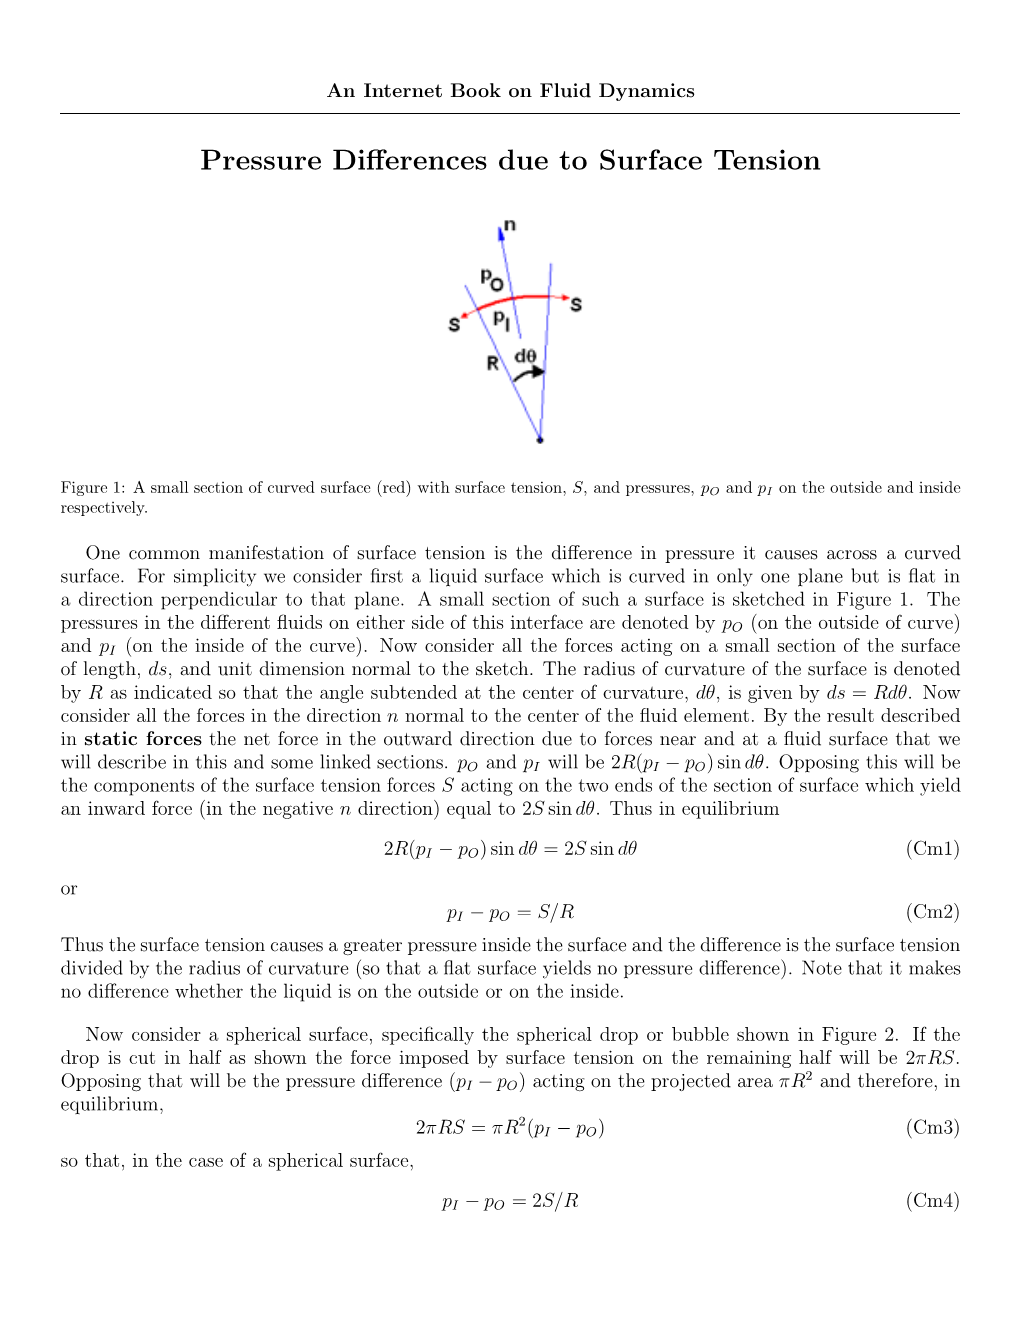 Pressure Differences Due to Surface Tension